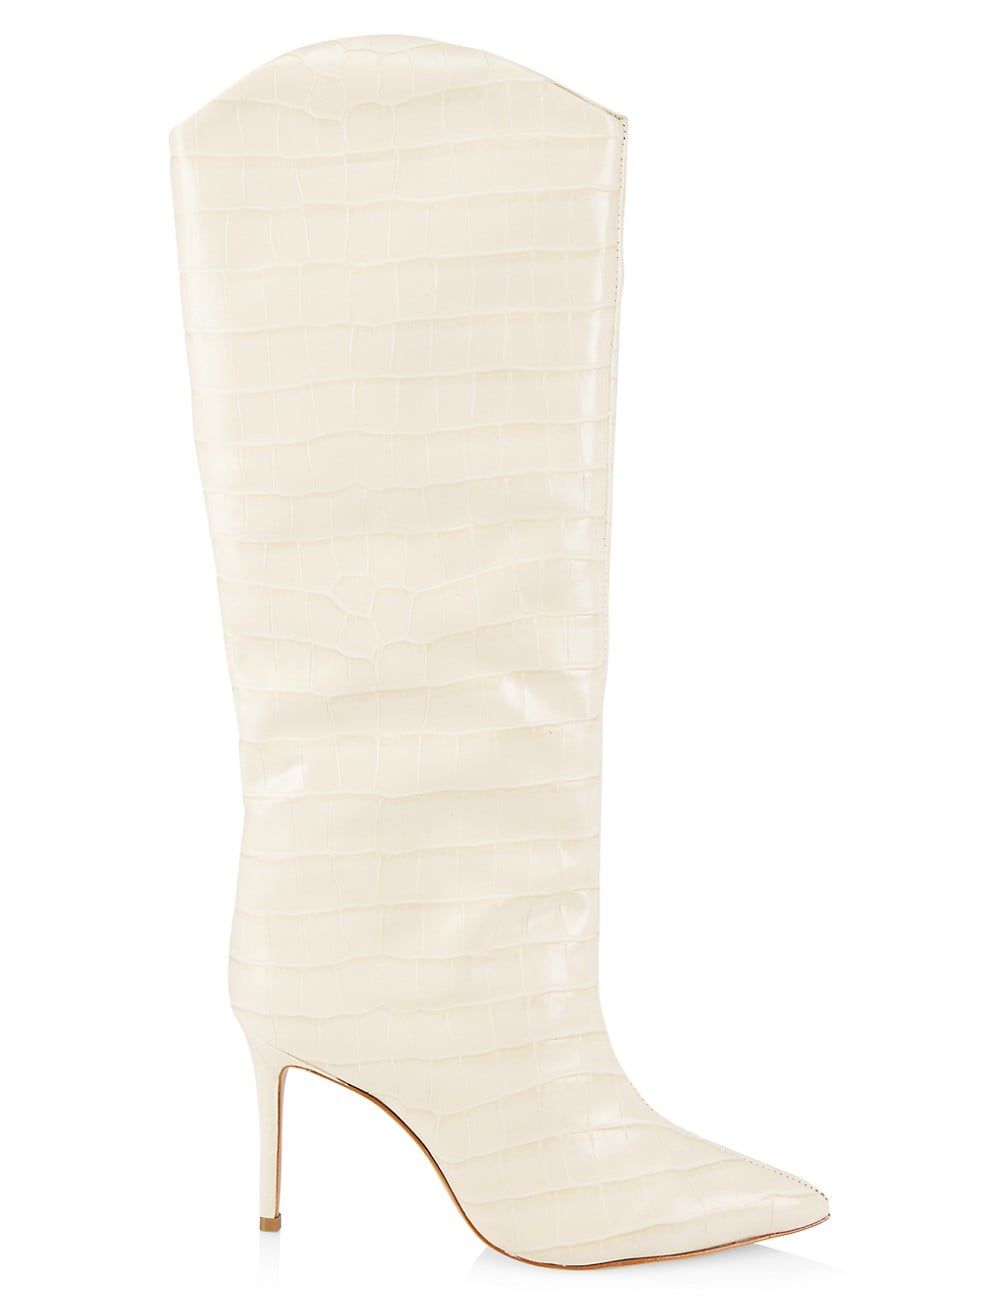 Maryana Croc-Embossed Leather Tall Boots | Saks Fifth Avenue